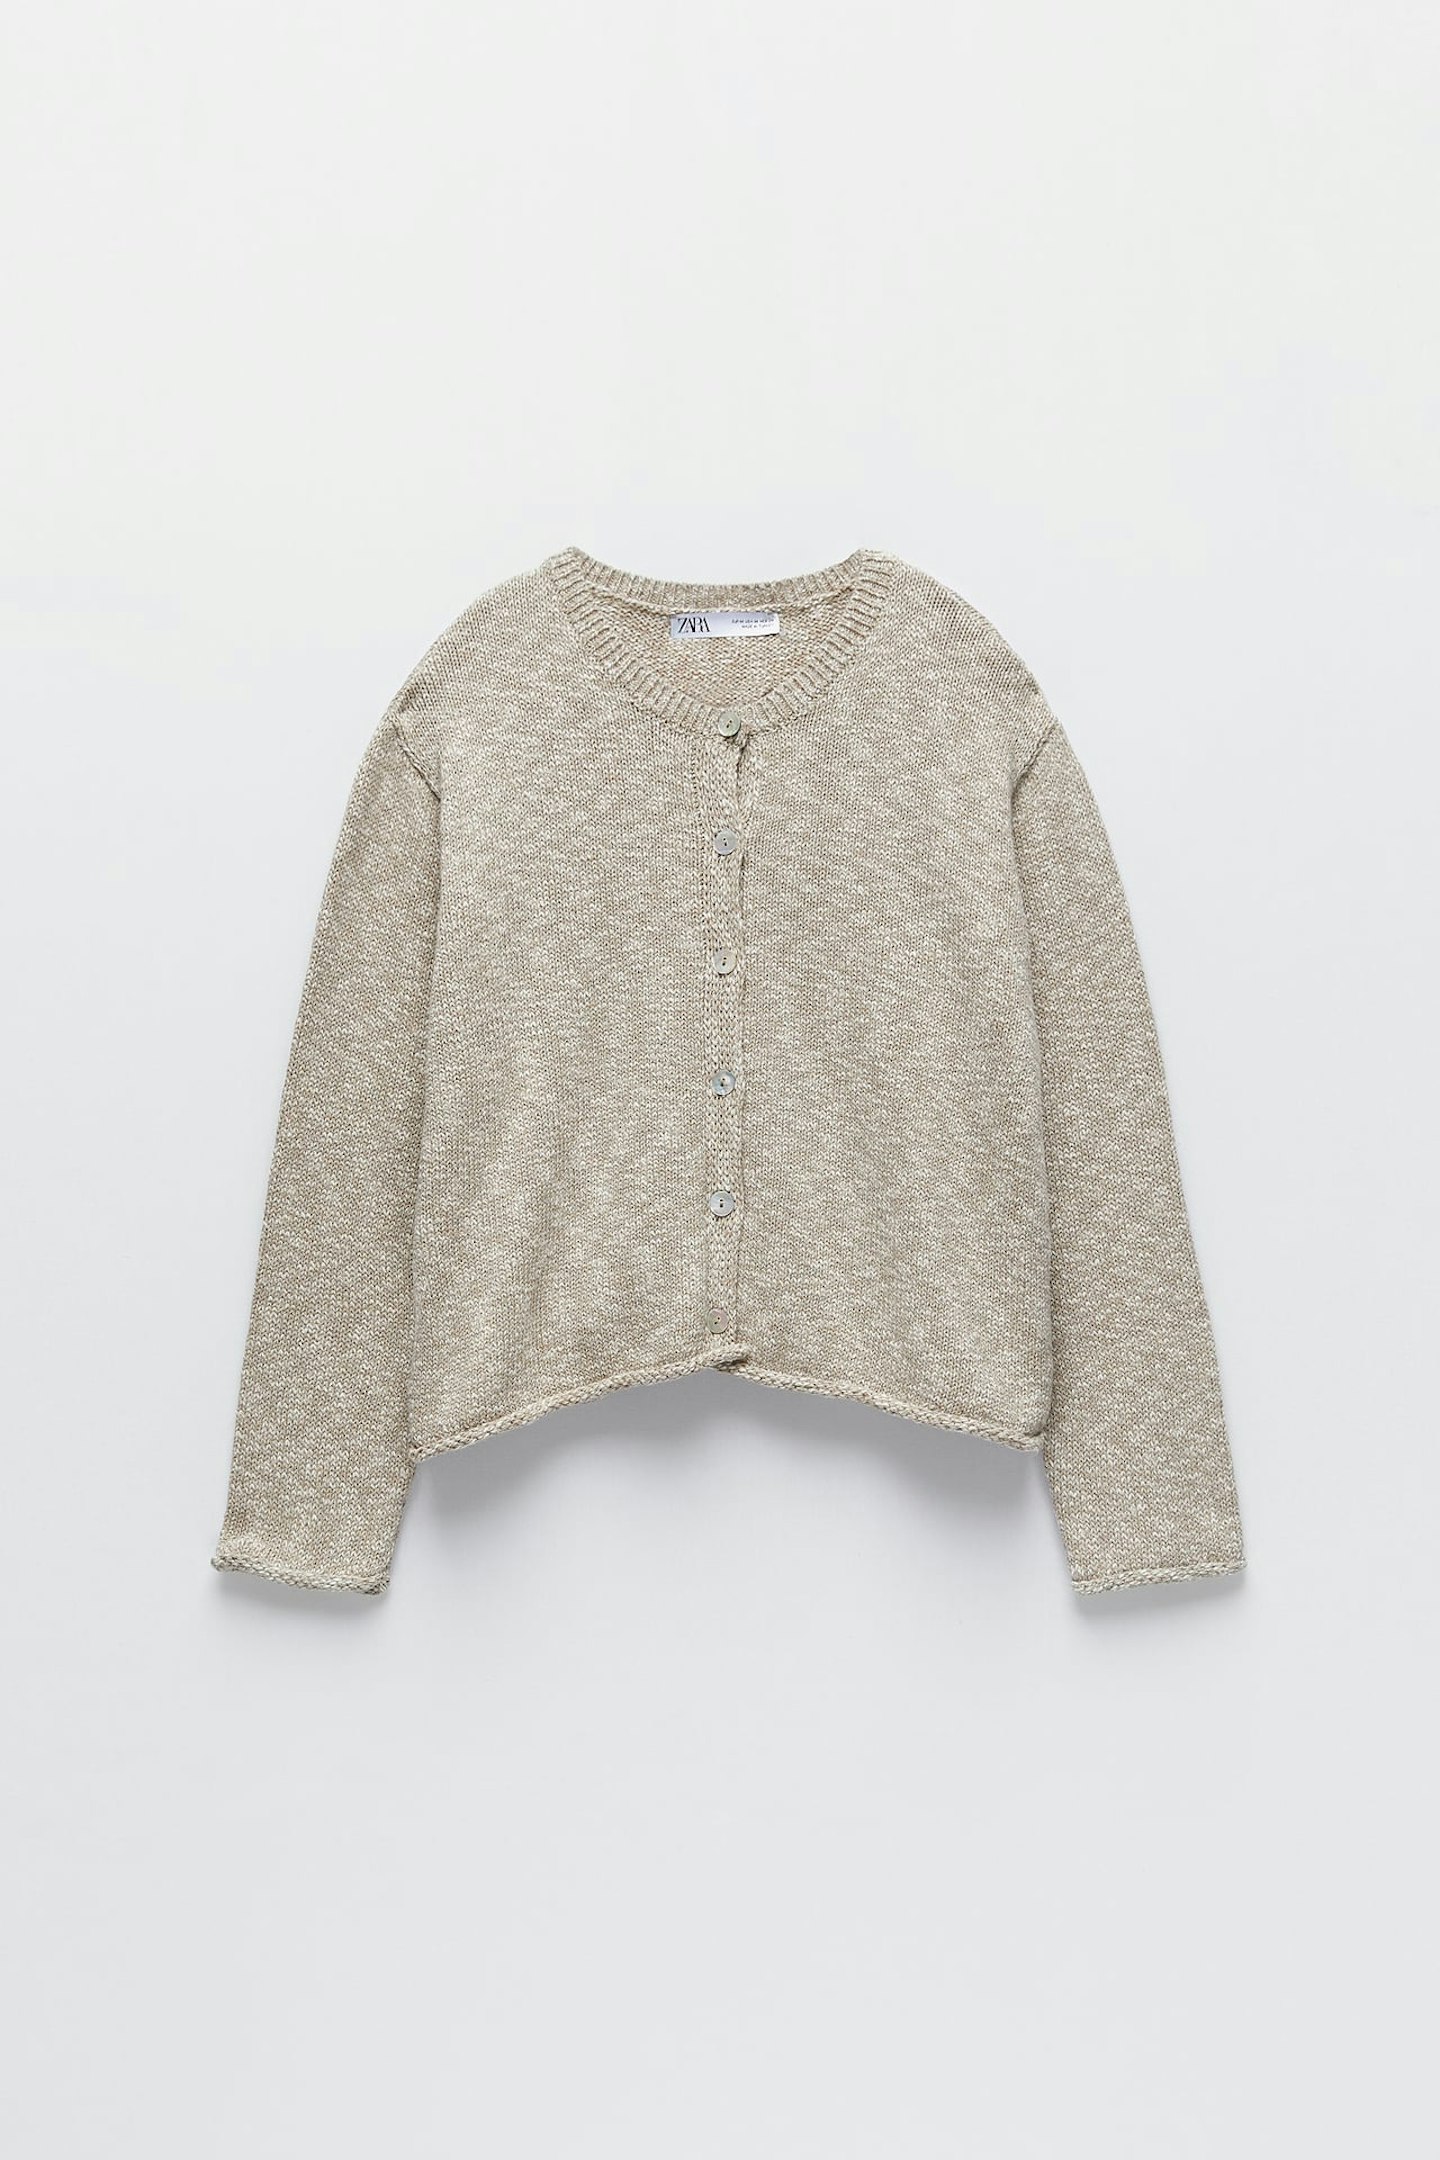 Zara, Knit Cardigan With Buttons, £25.99